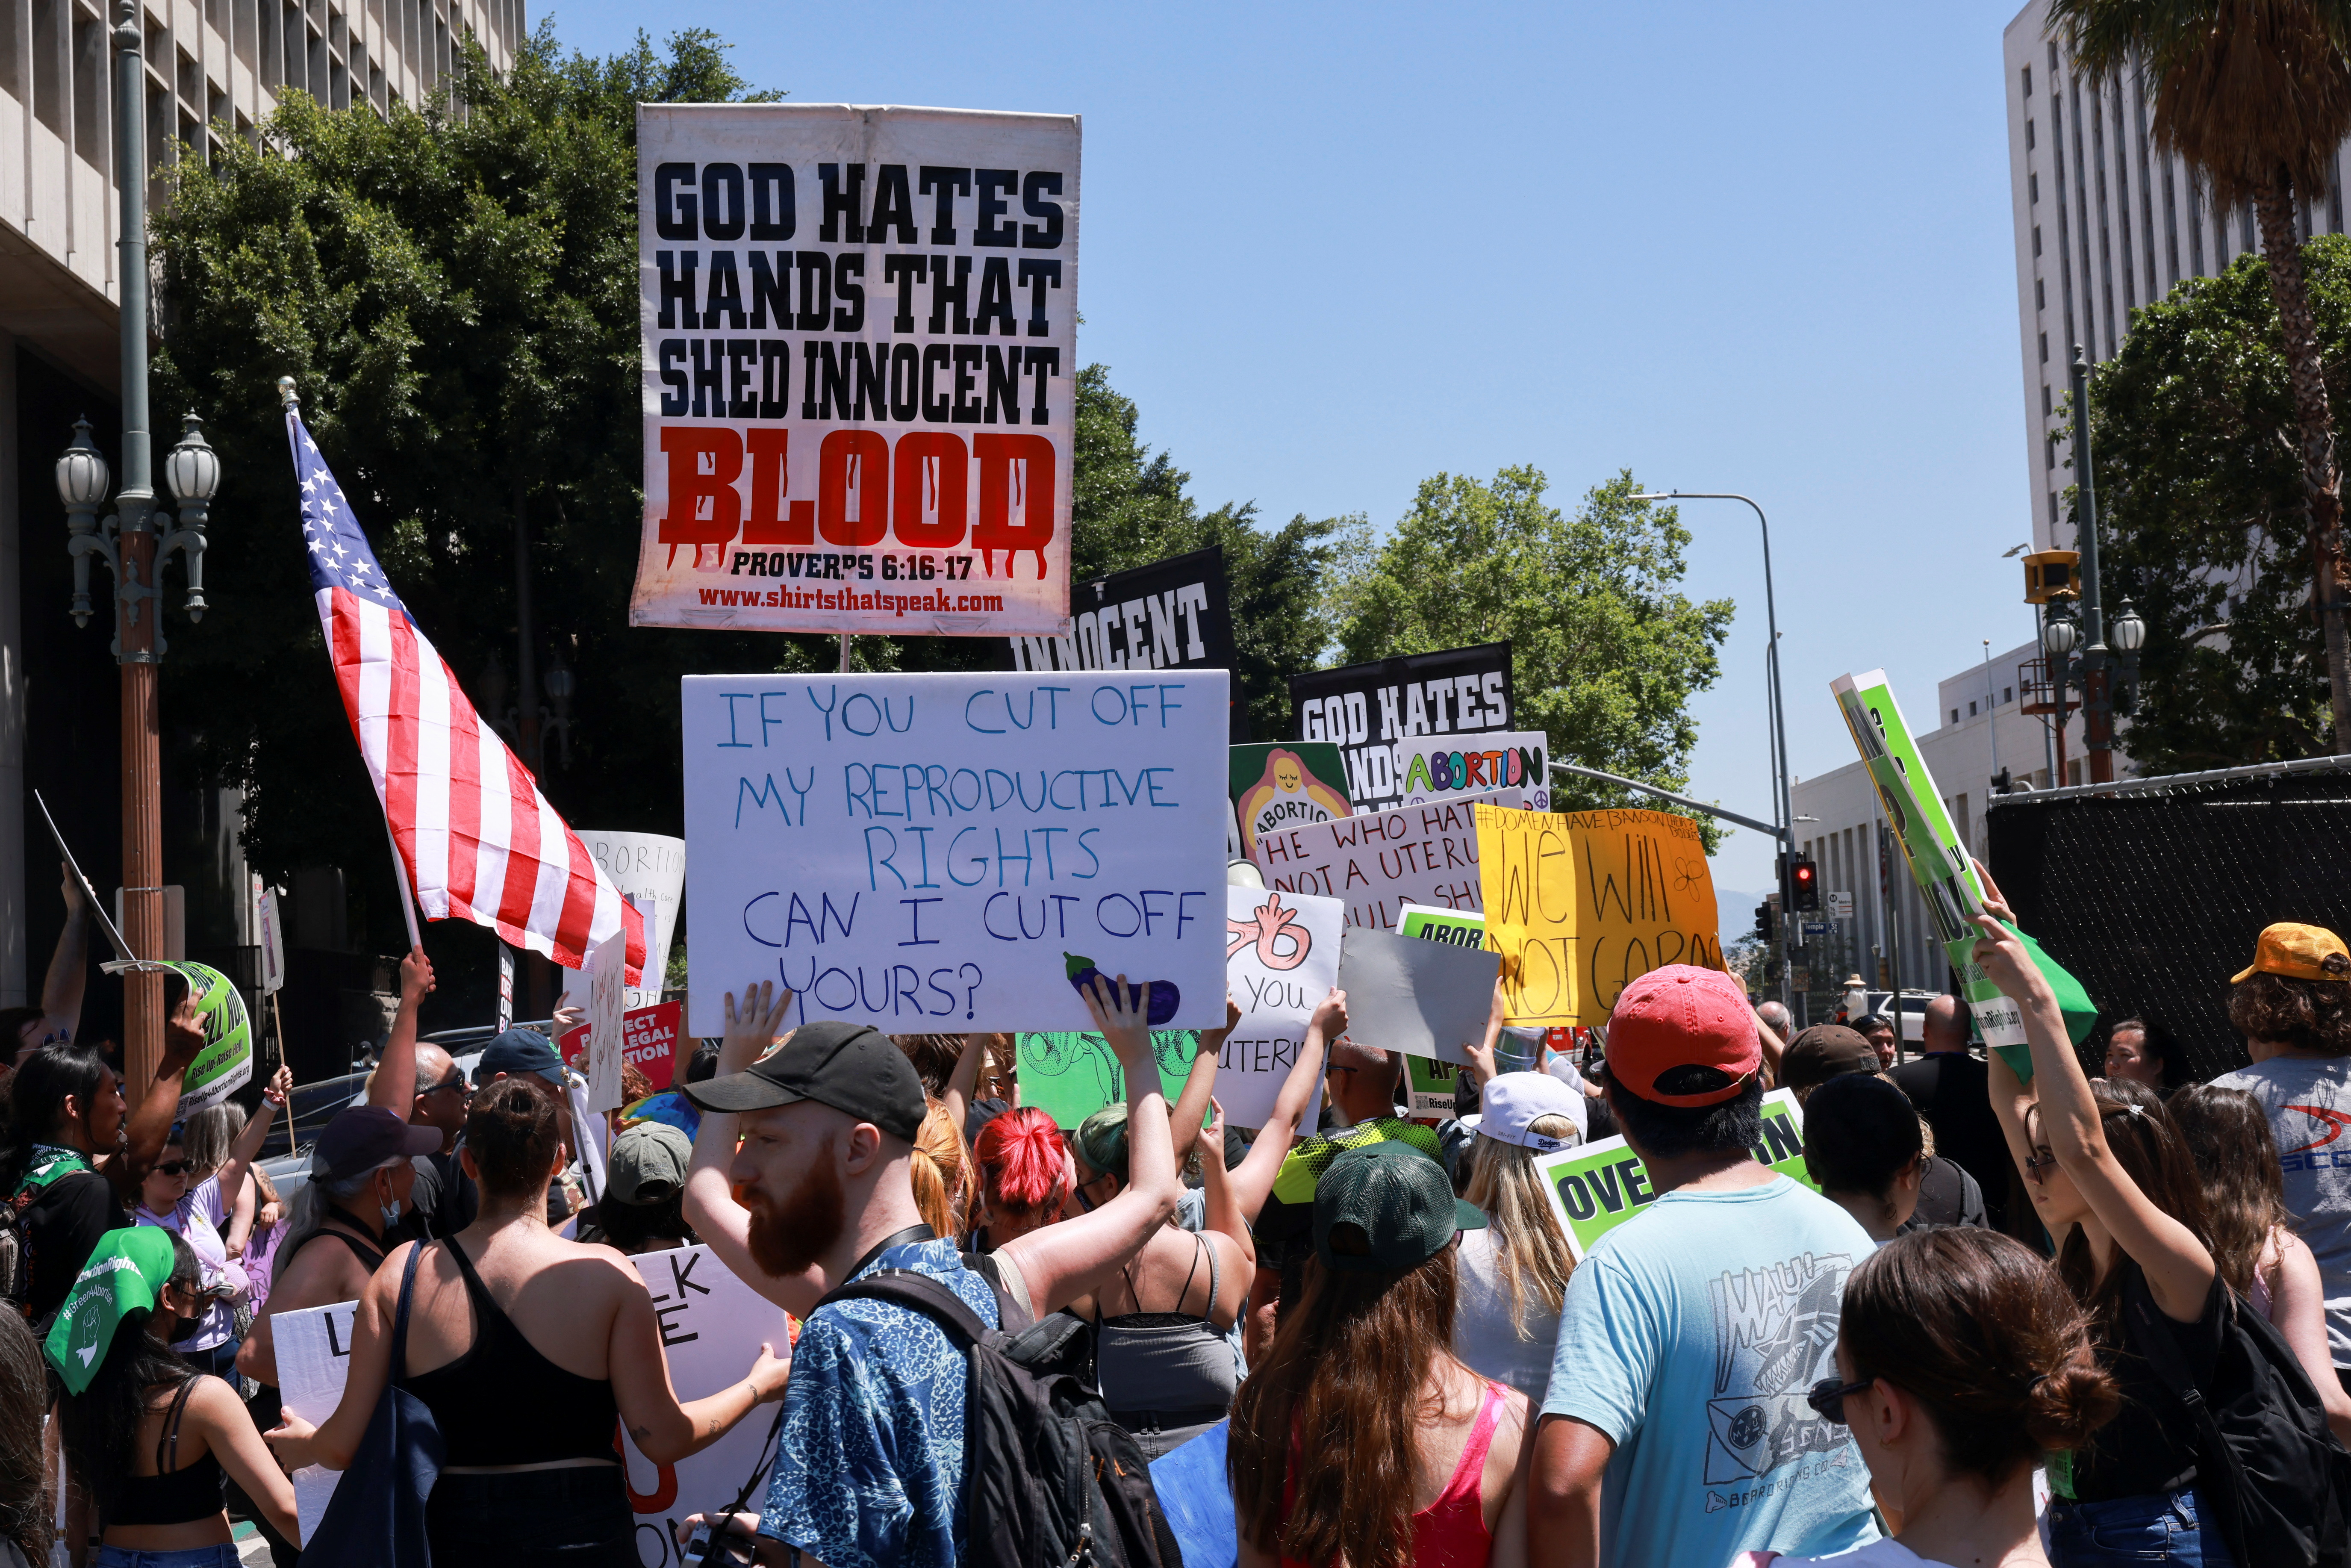 Abortion rights protesters participate in nationwide demonstrations, in Los Angeles